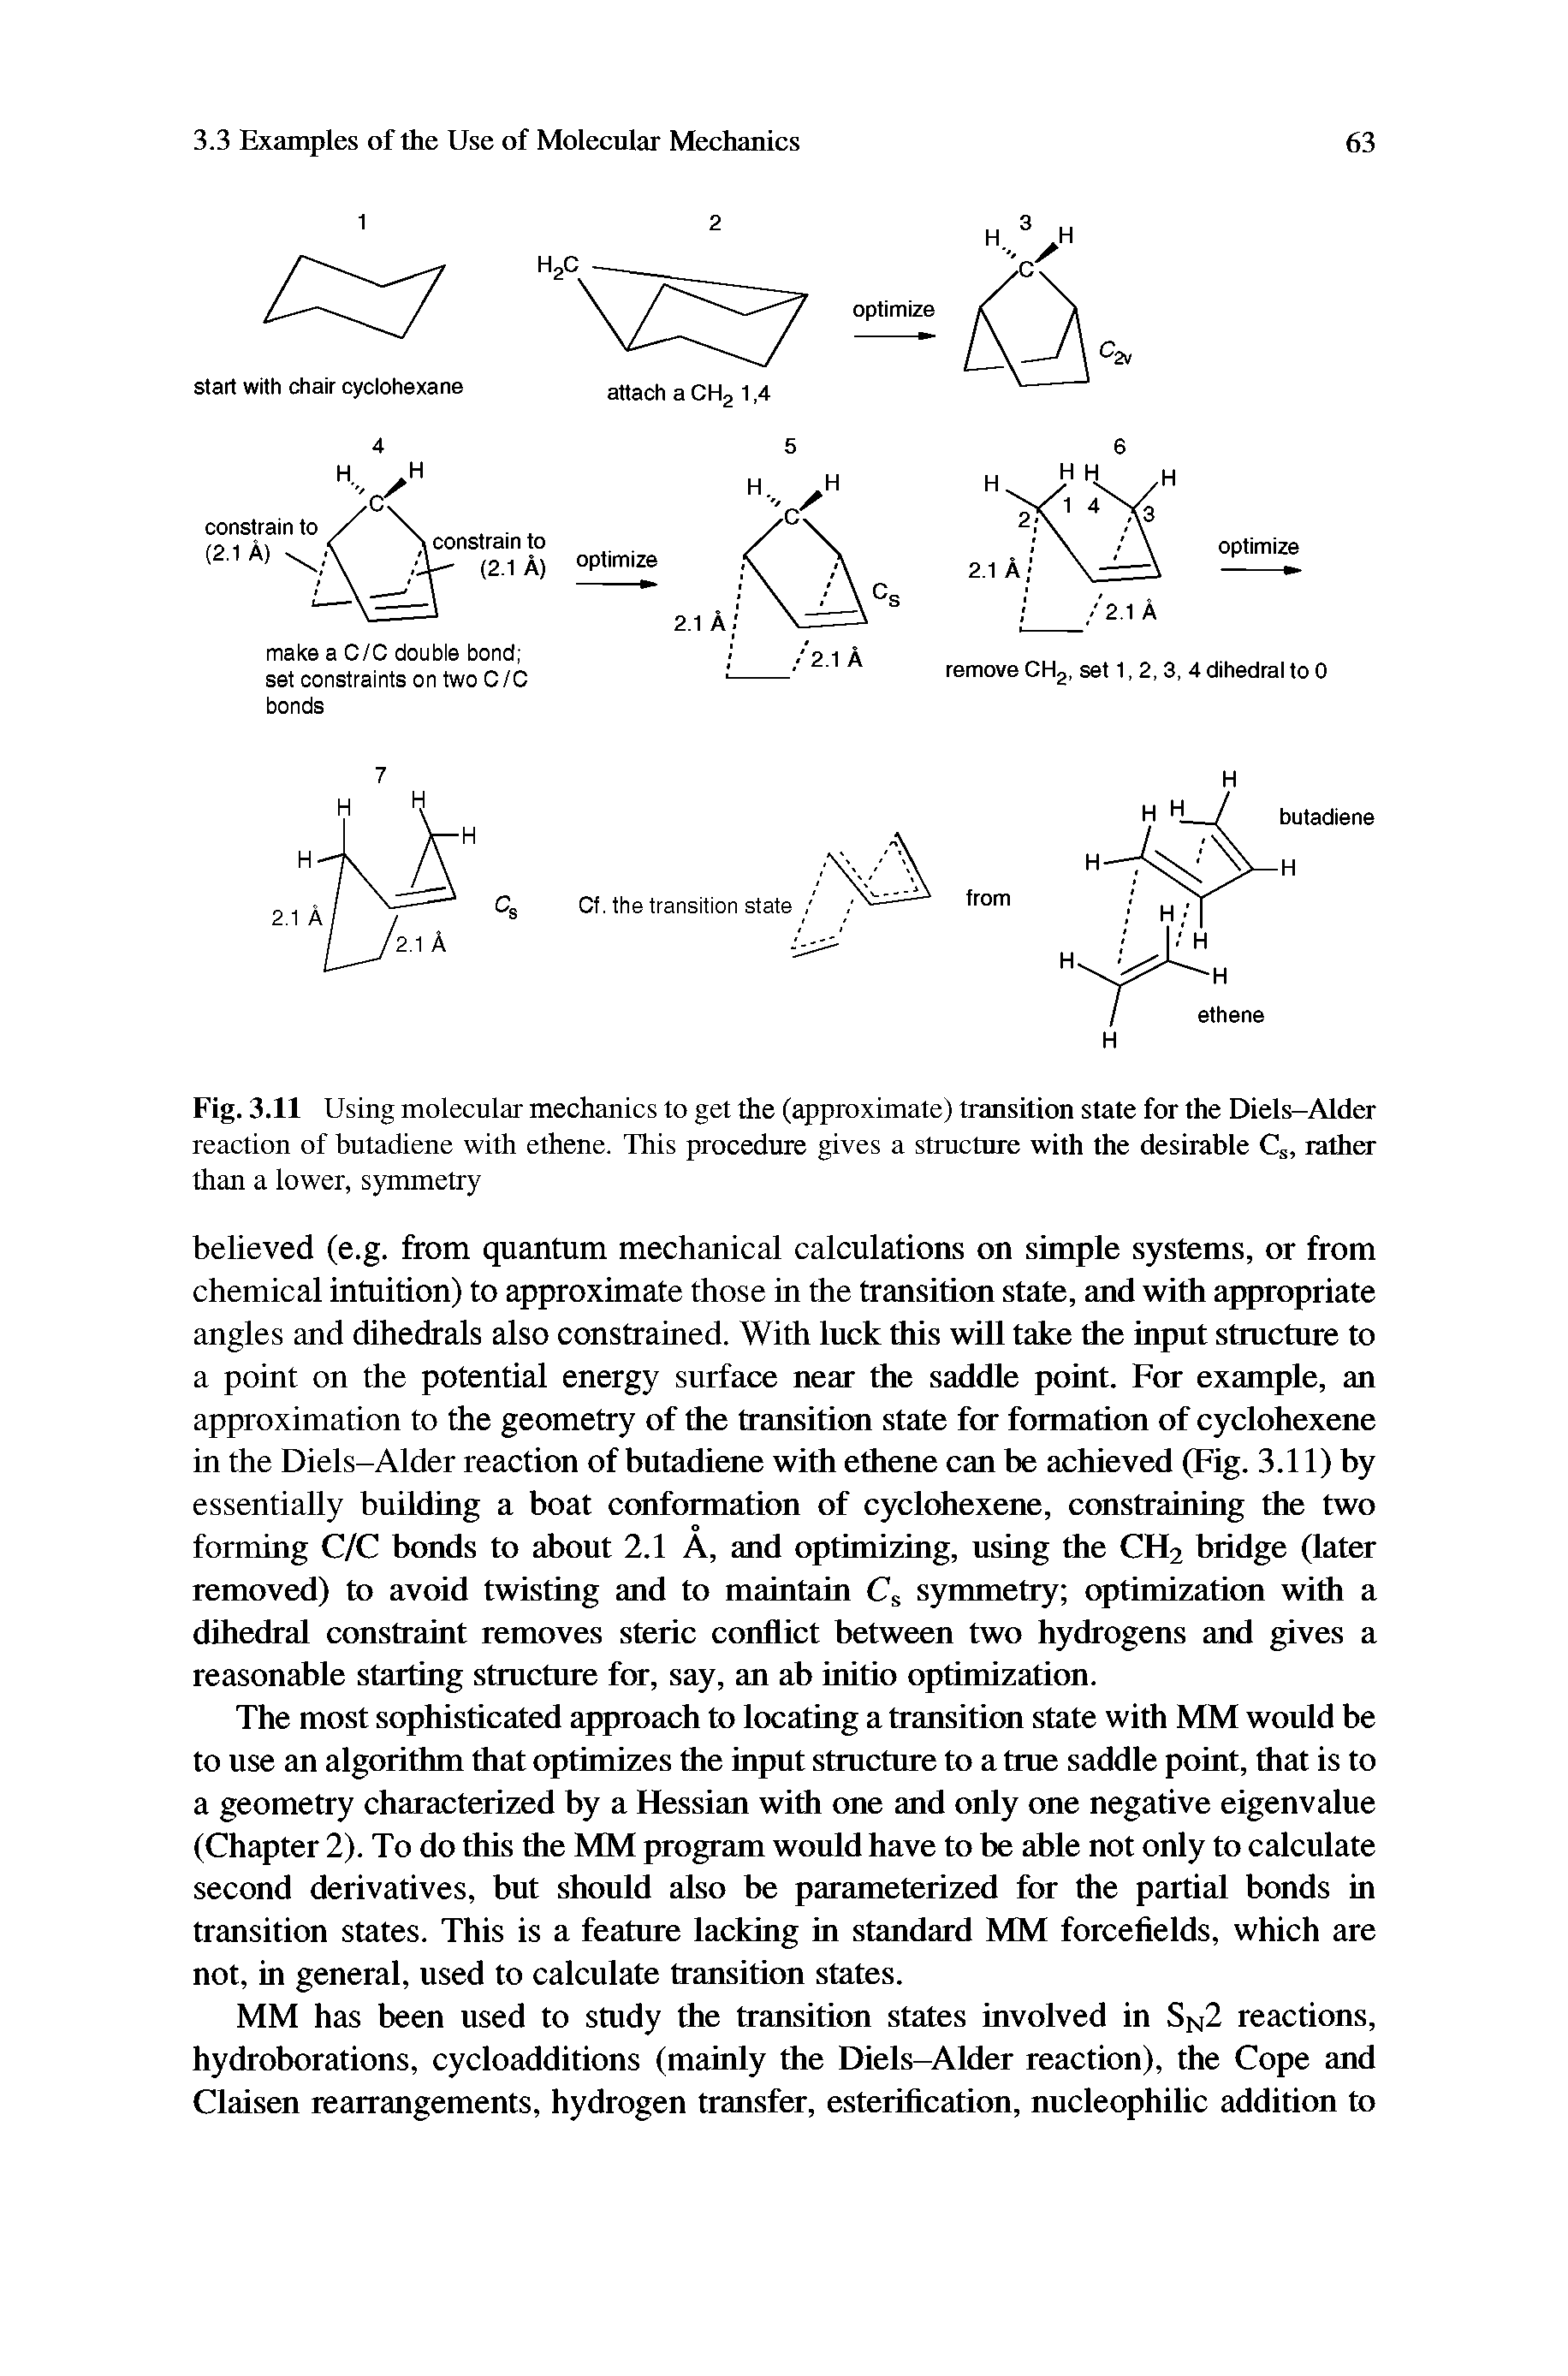 Fig. 3.11 Using molecular mechanics to get the (approximate) transition state for the Diels-Alder reaction of butadiene with ethene. This procedure gives a structure with the desirable Cs, rather than a lower, symmetry...